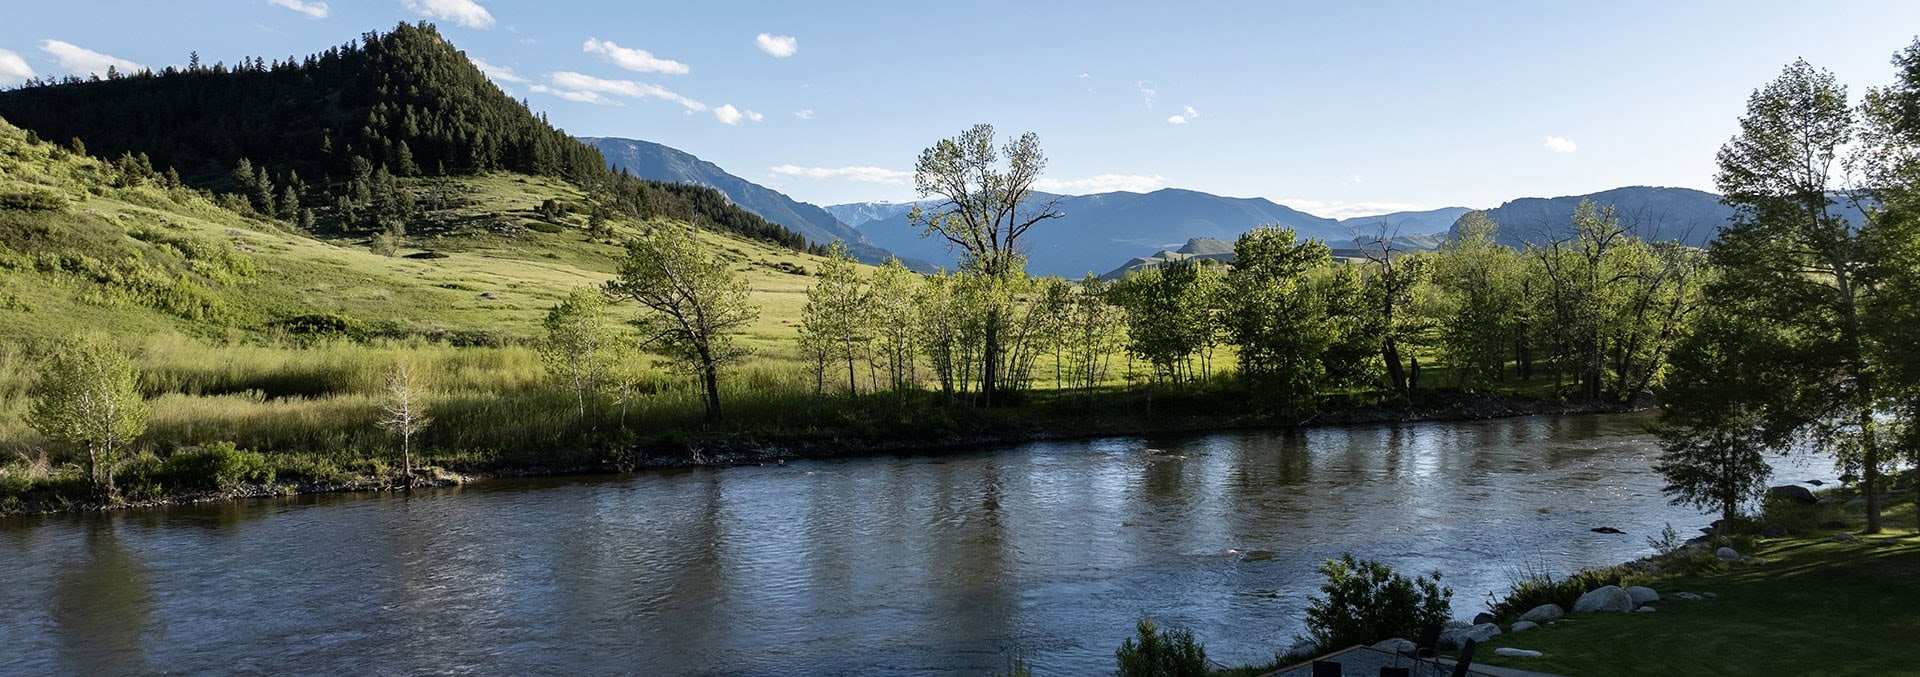 montana fly fishing property for sale castle rock river ranch